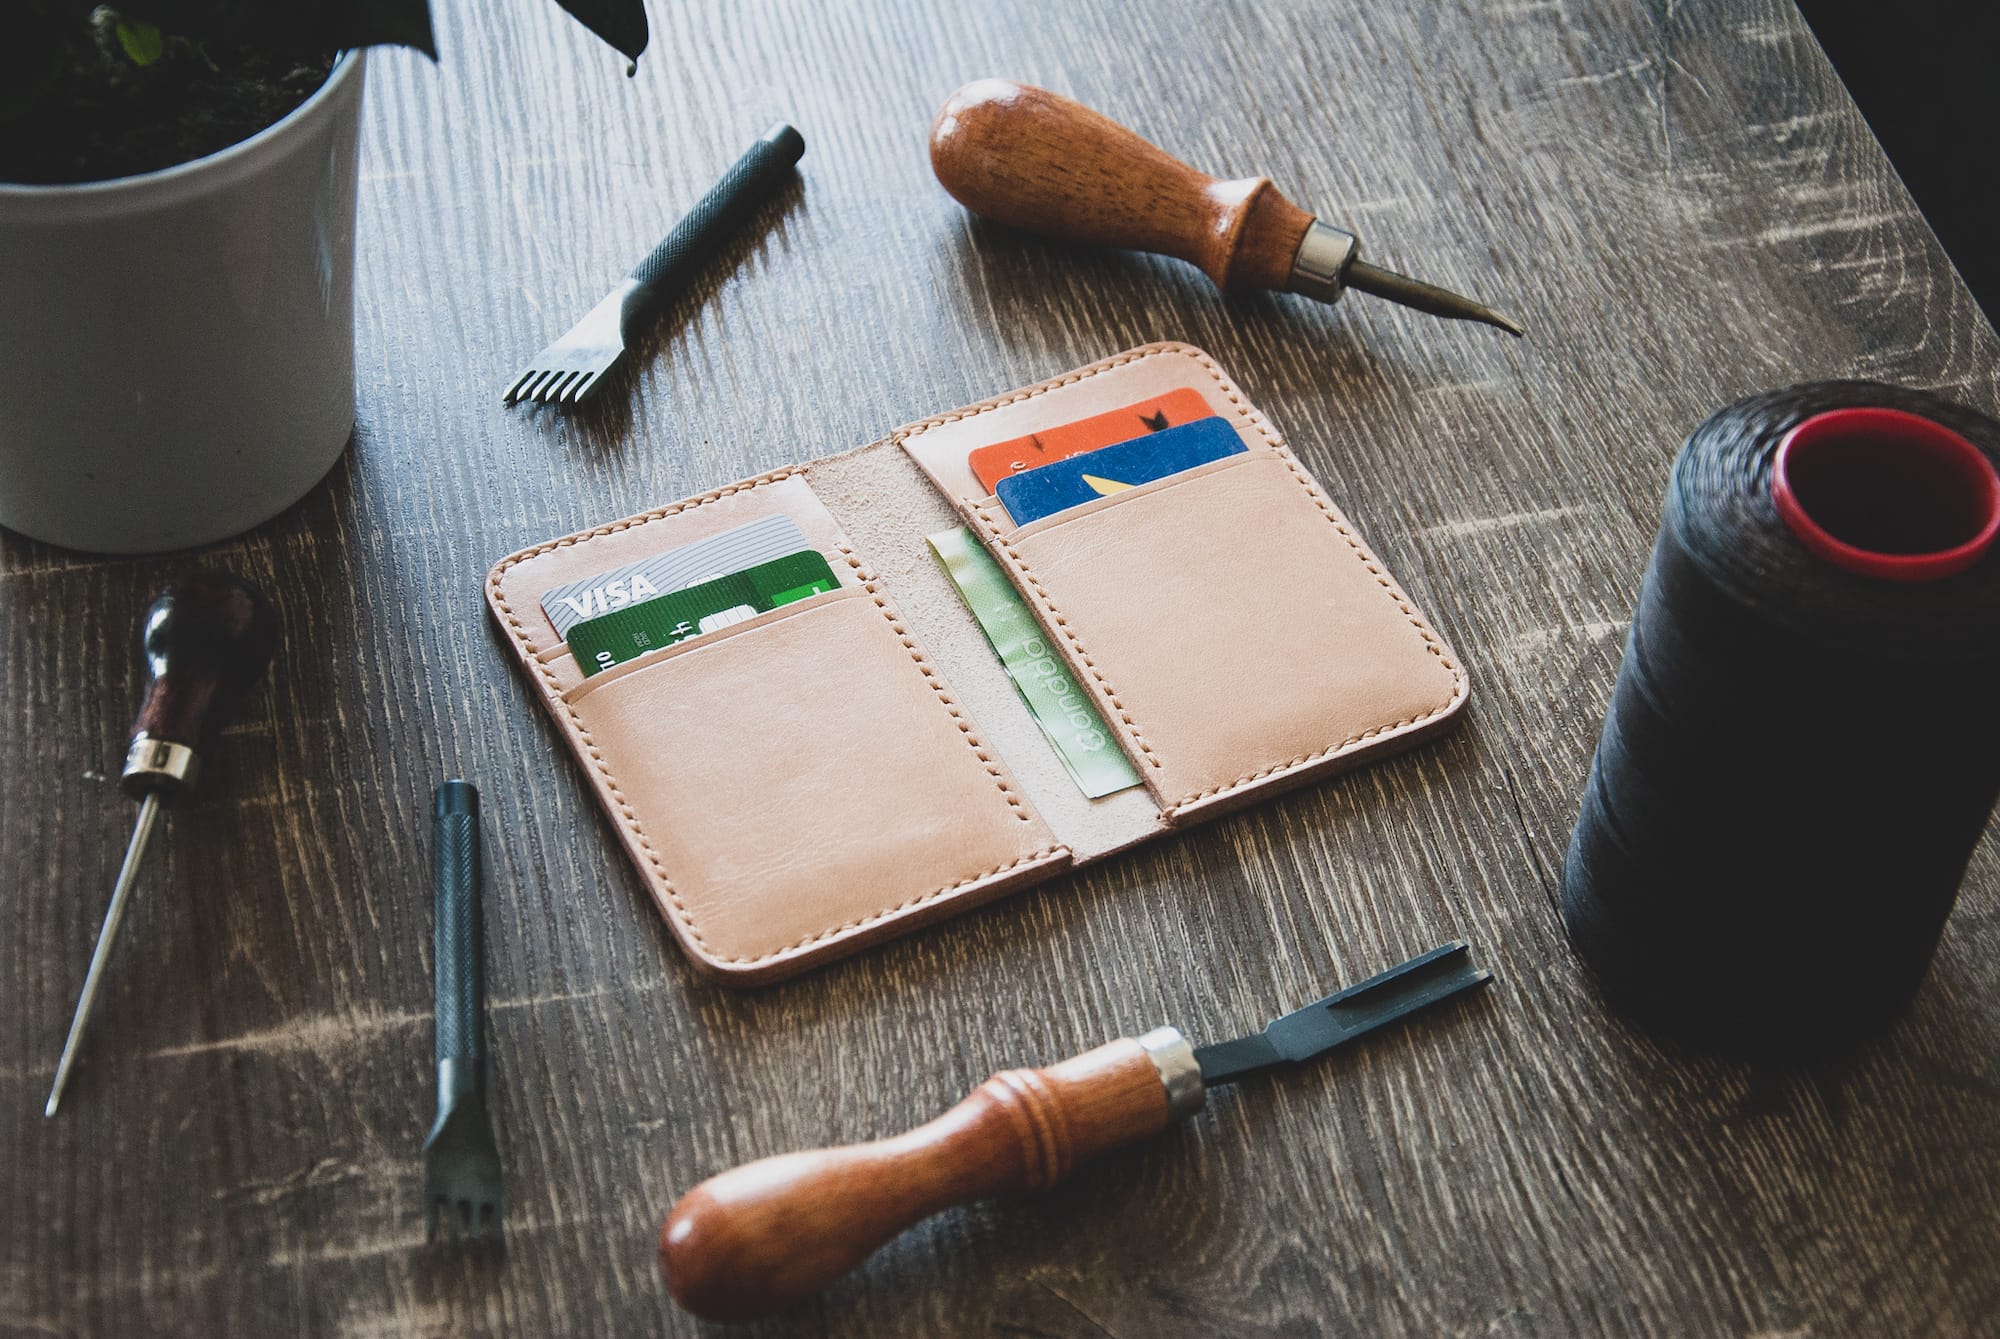 leather wallet with credit cards and cash on a wooden table with leatherworking tools and a spool of thread